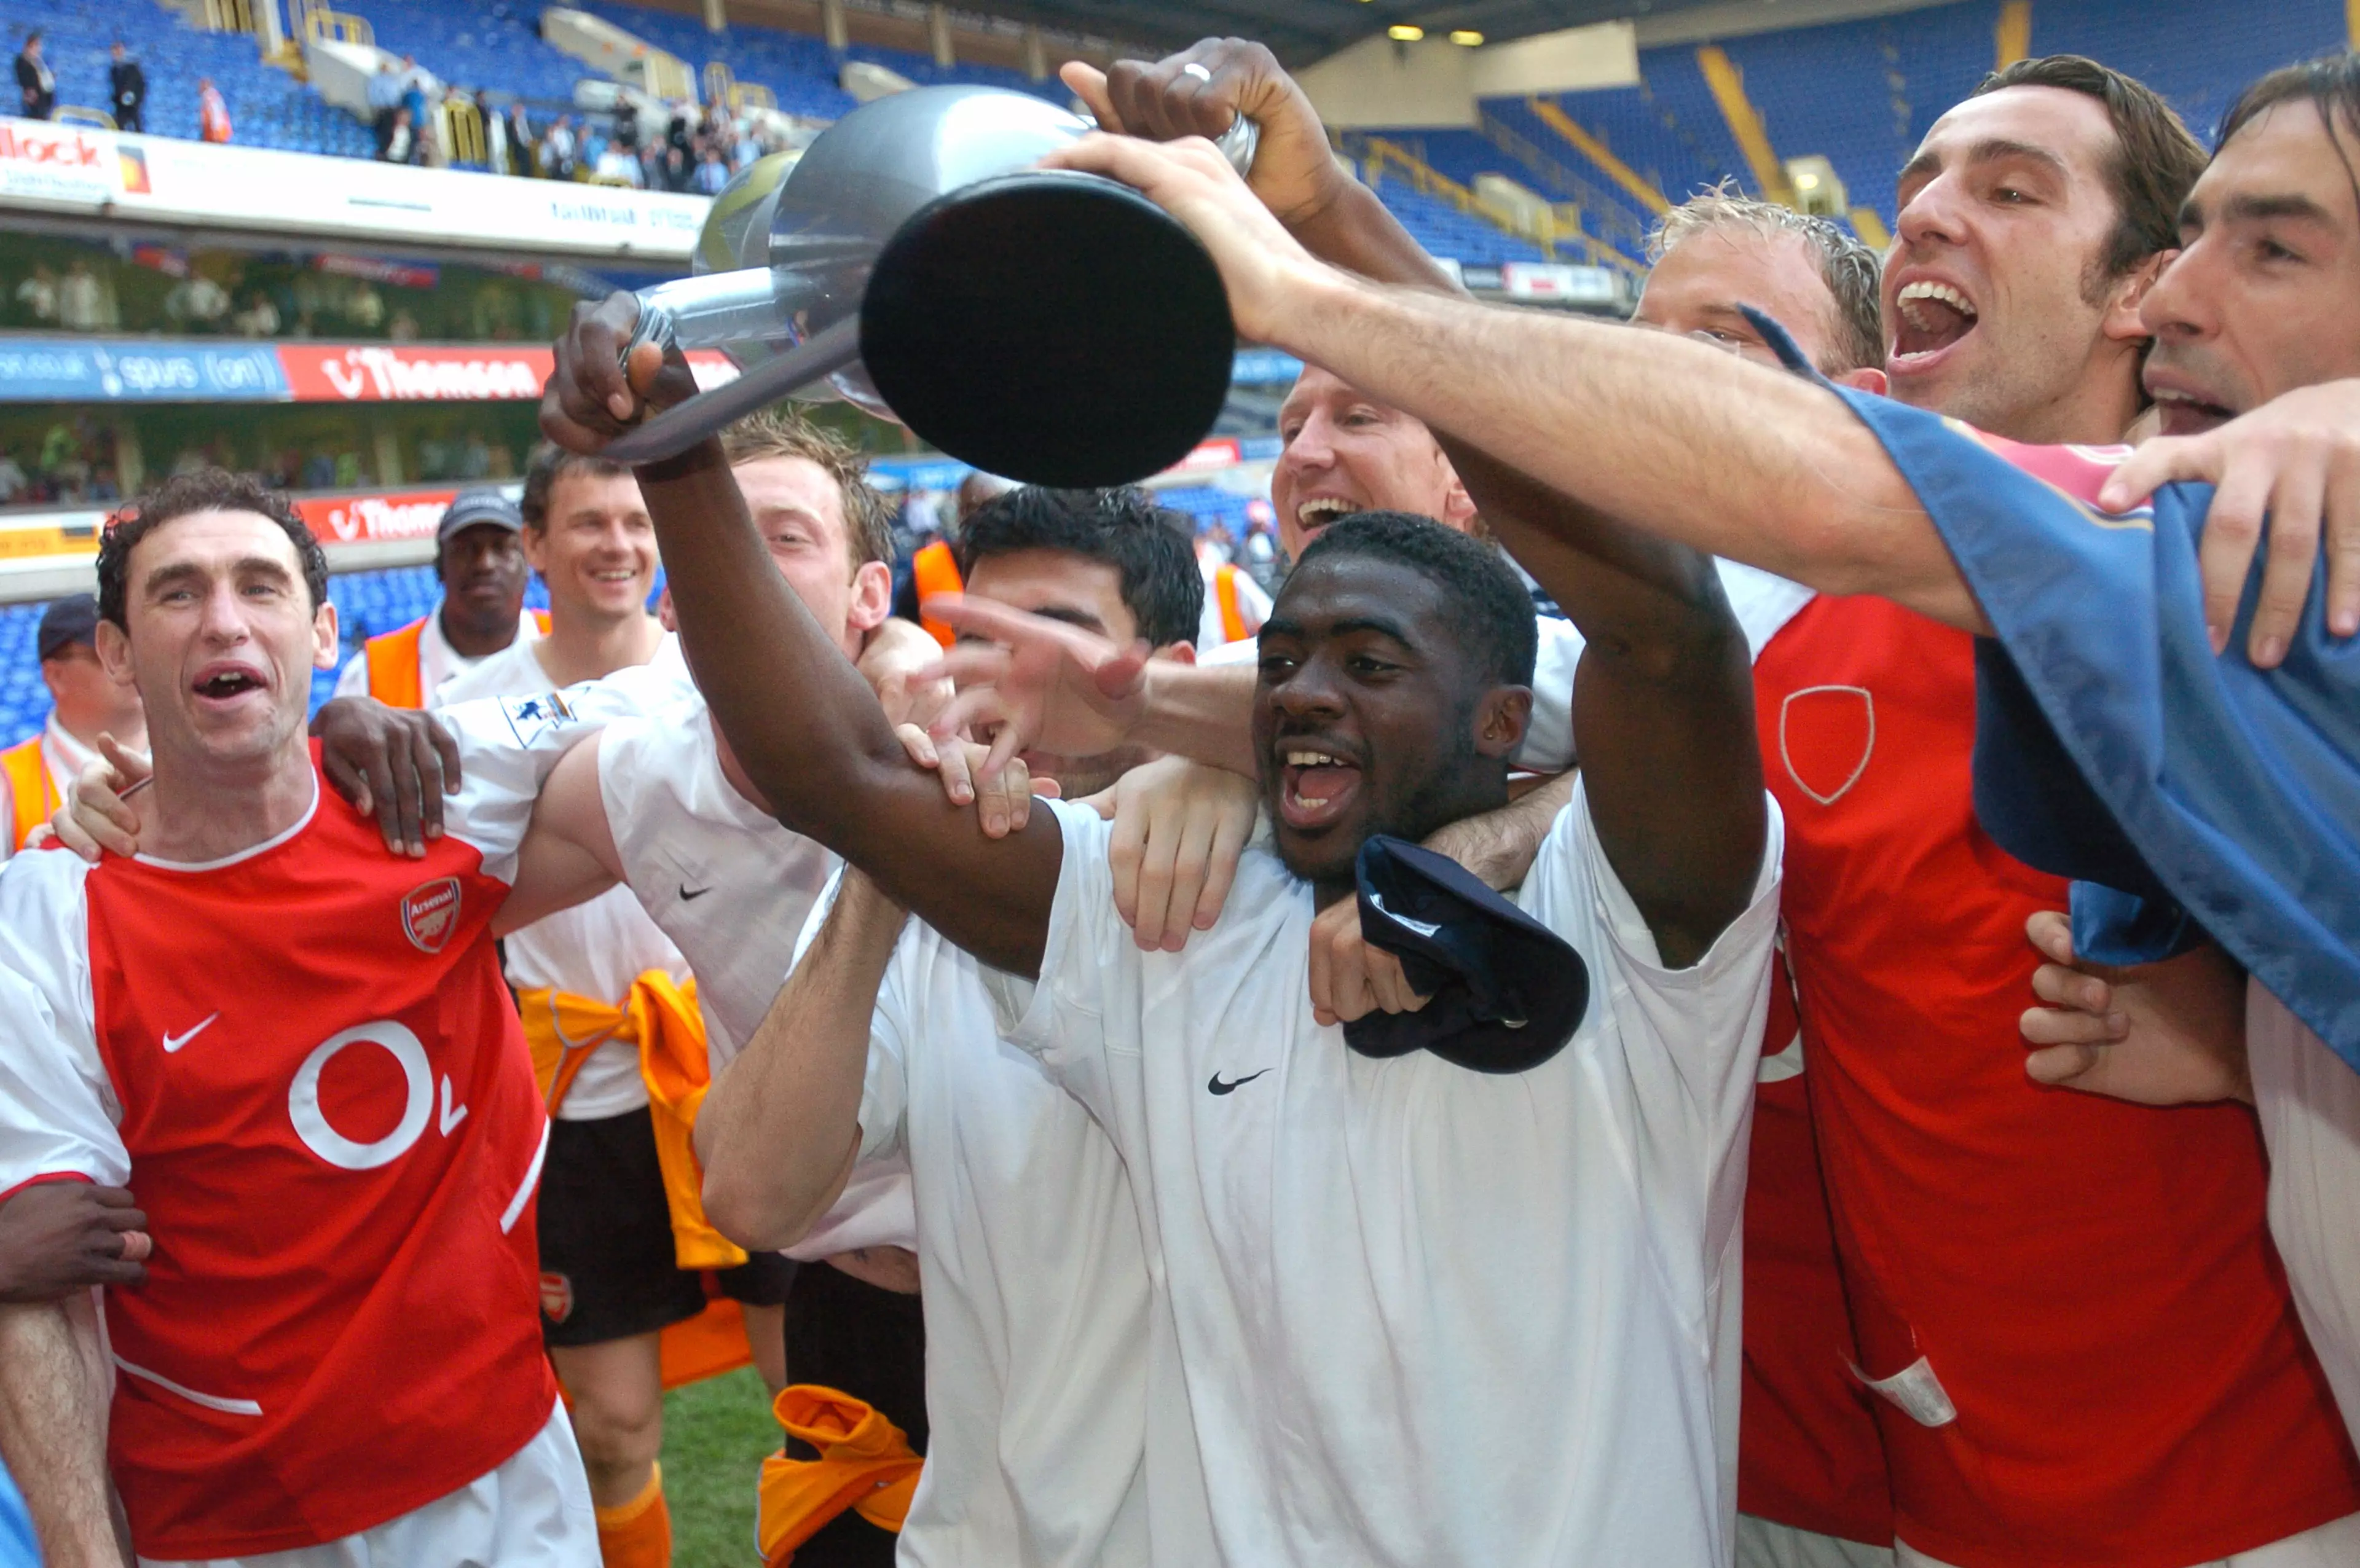 Kolo Toure with an inflatable version of the Premier League trophy. Image: PA Images